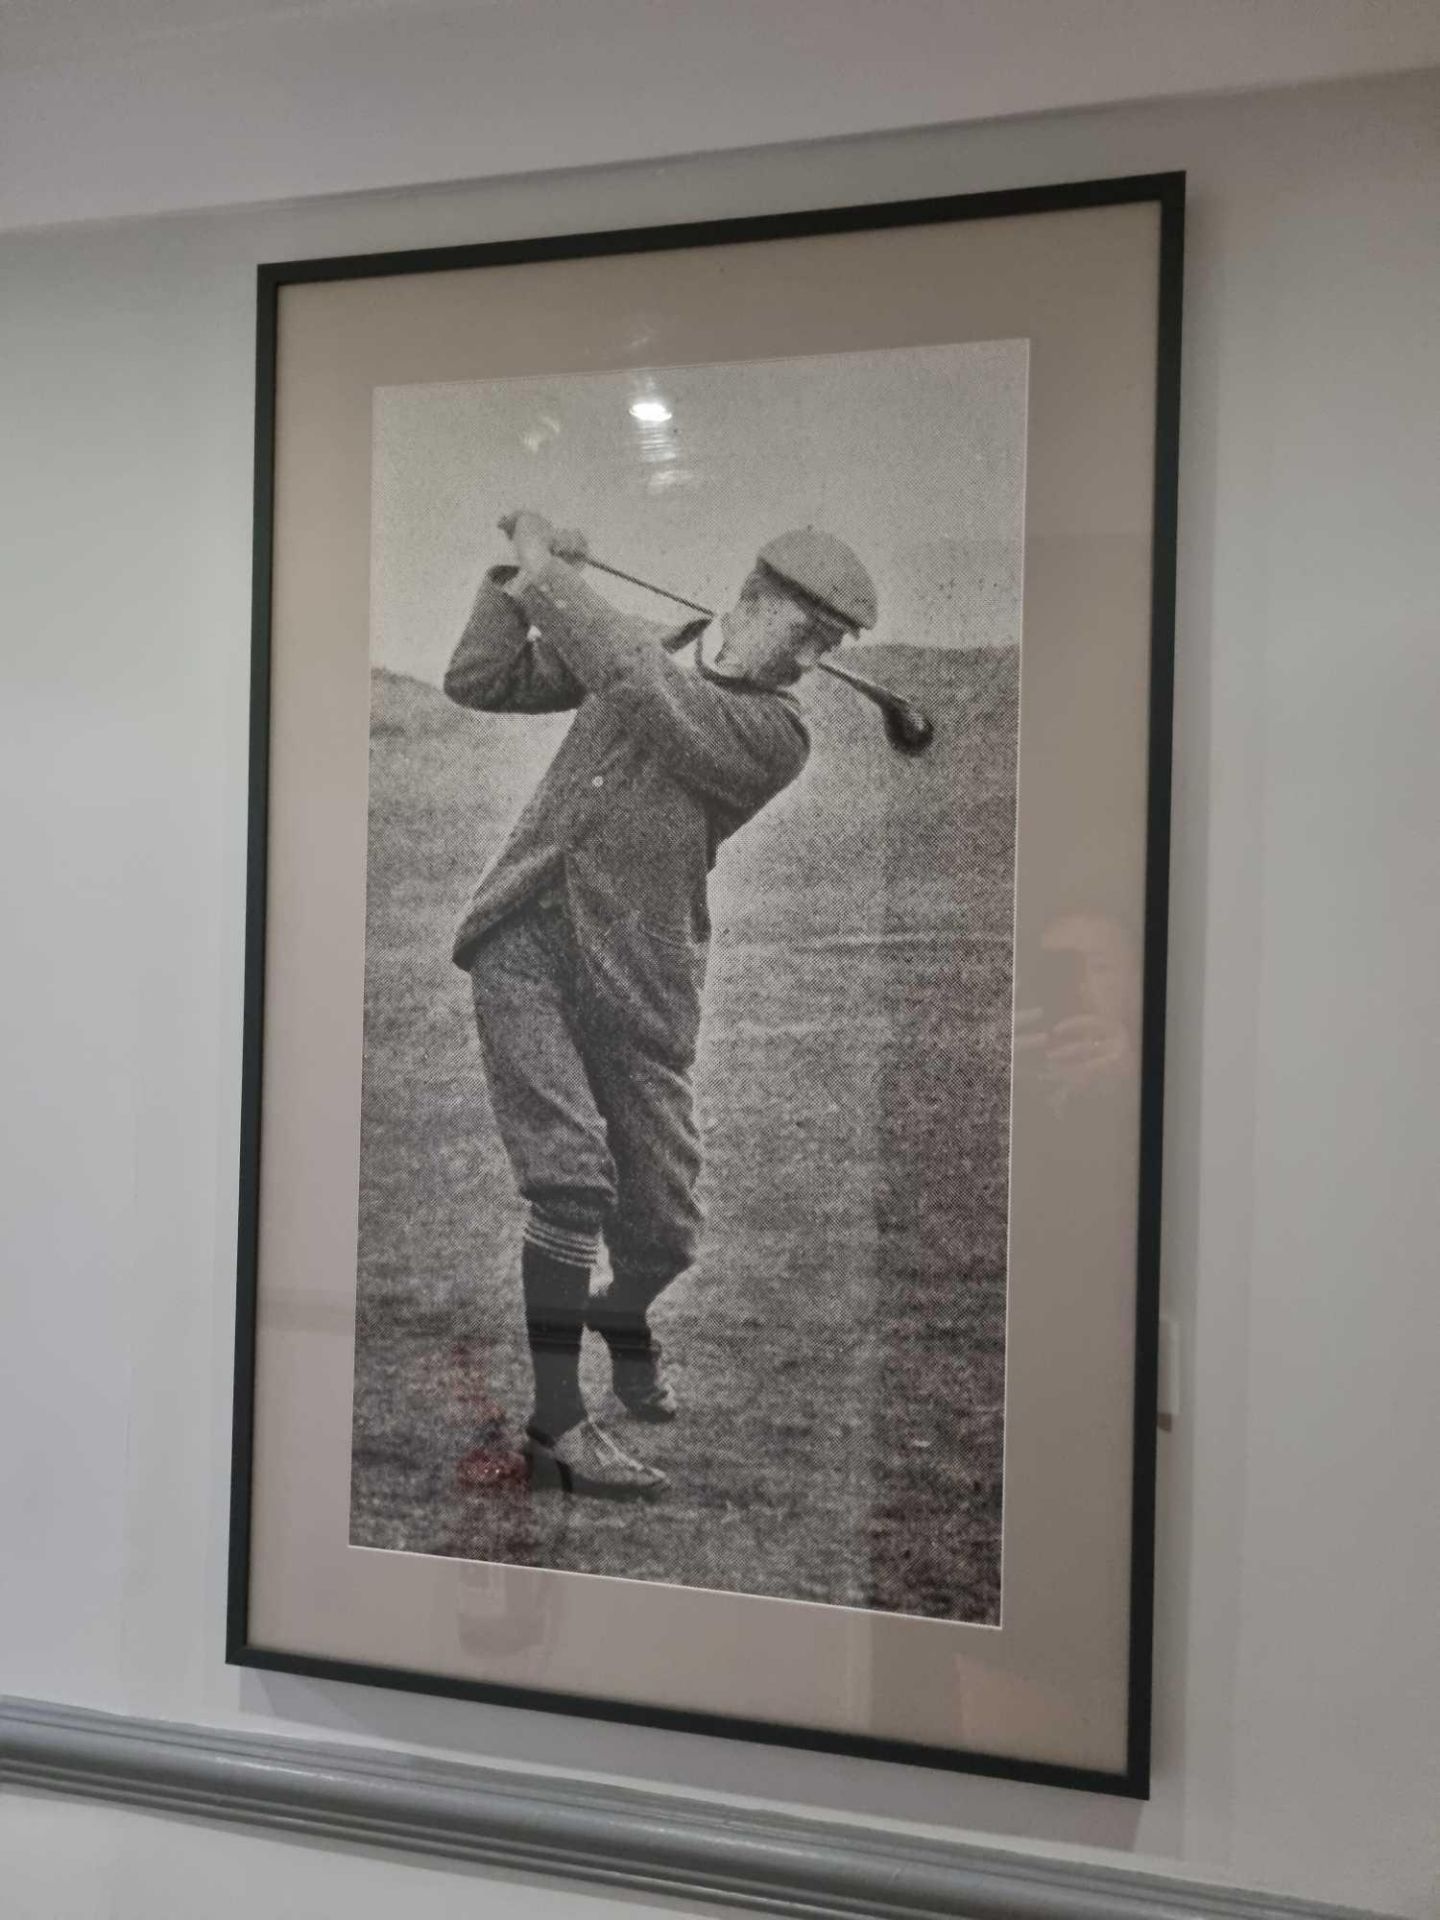 Wall Decorative Art curated by Elegant Clutter Framed wall art golfer 70 x 110cm lot as photographed